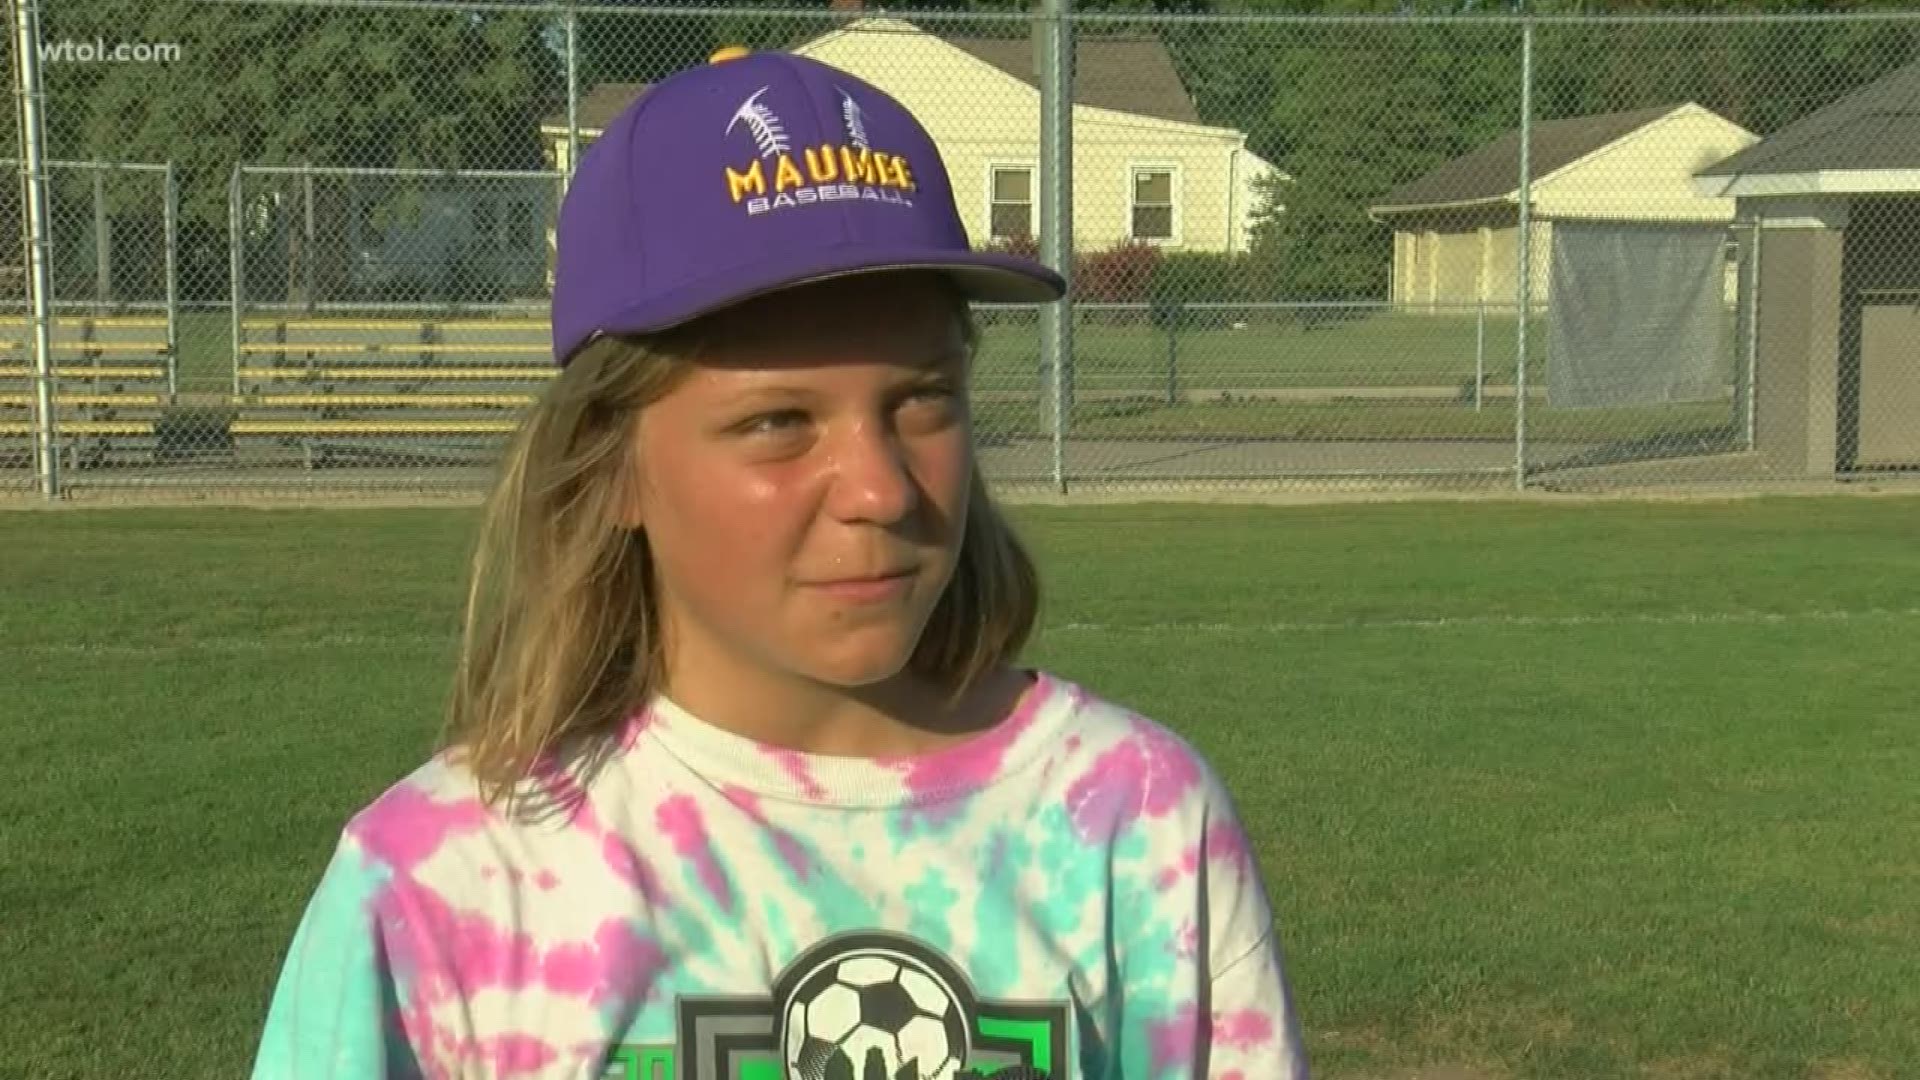 Taylor Smith has no plans to switch to softball. Baseball is what she loves.